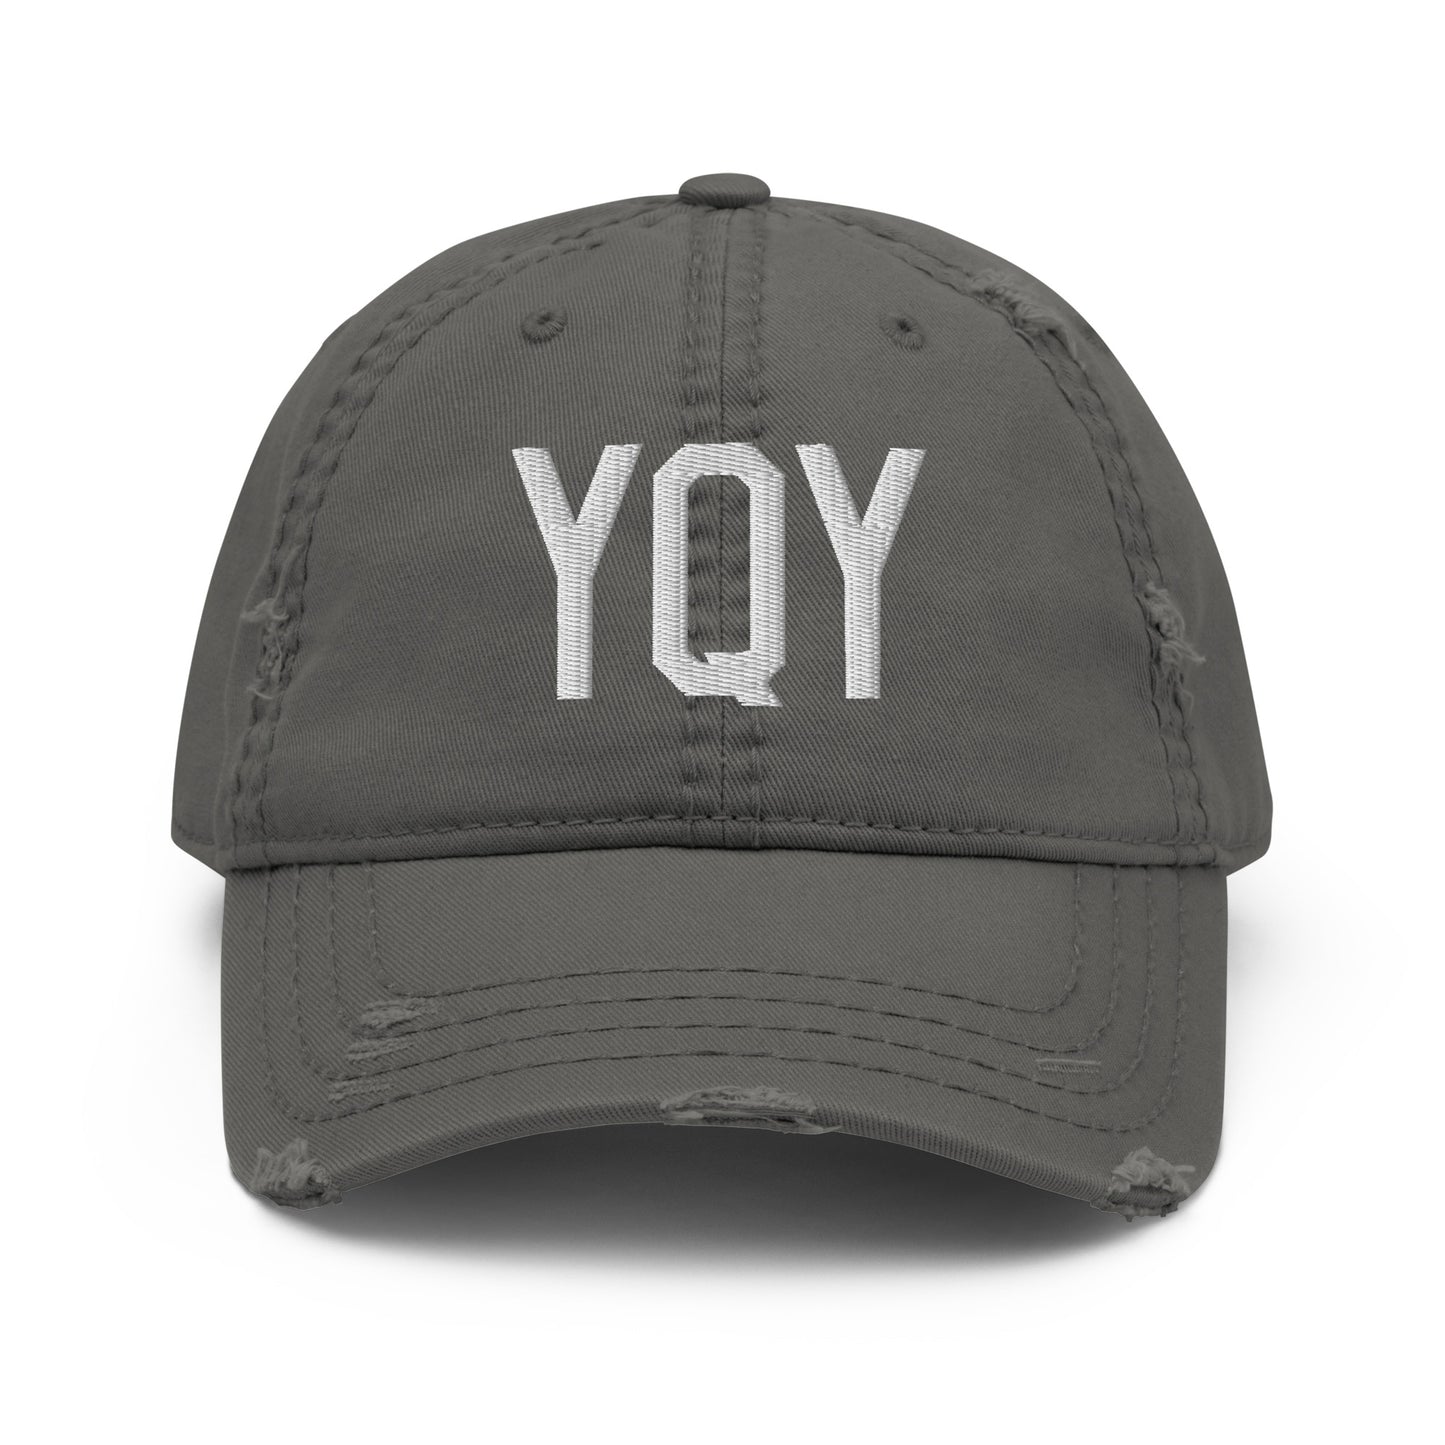 Airport Code Distressed Hat - White • YQY Sydney • YHM Designs - Image 15